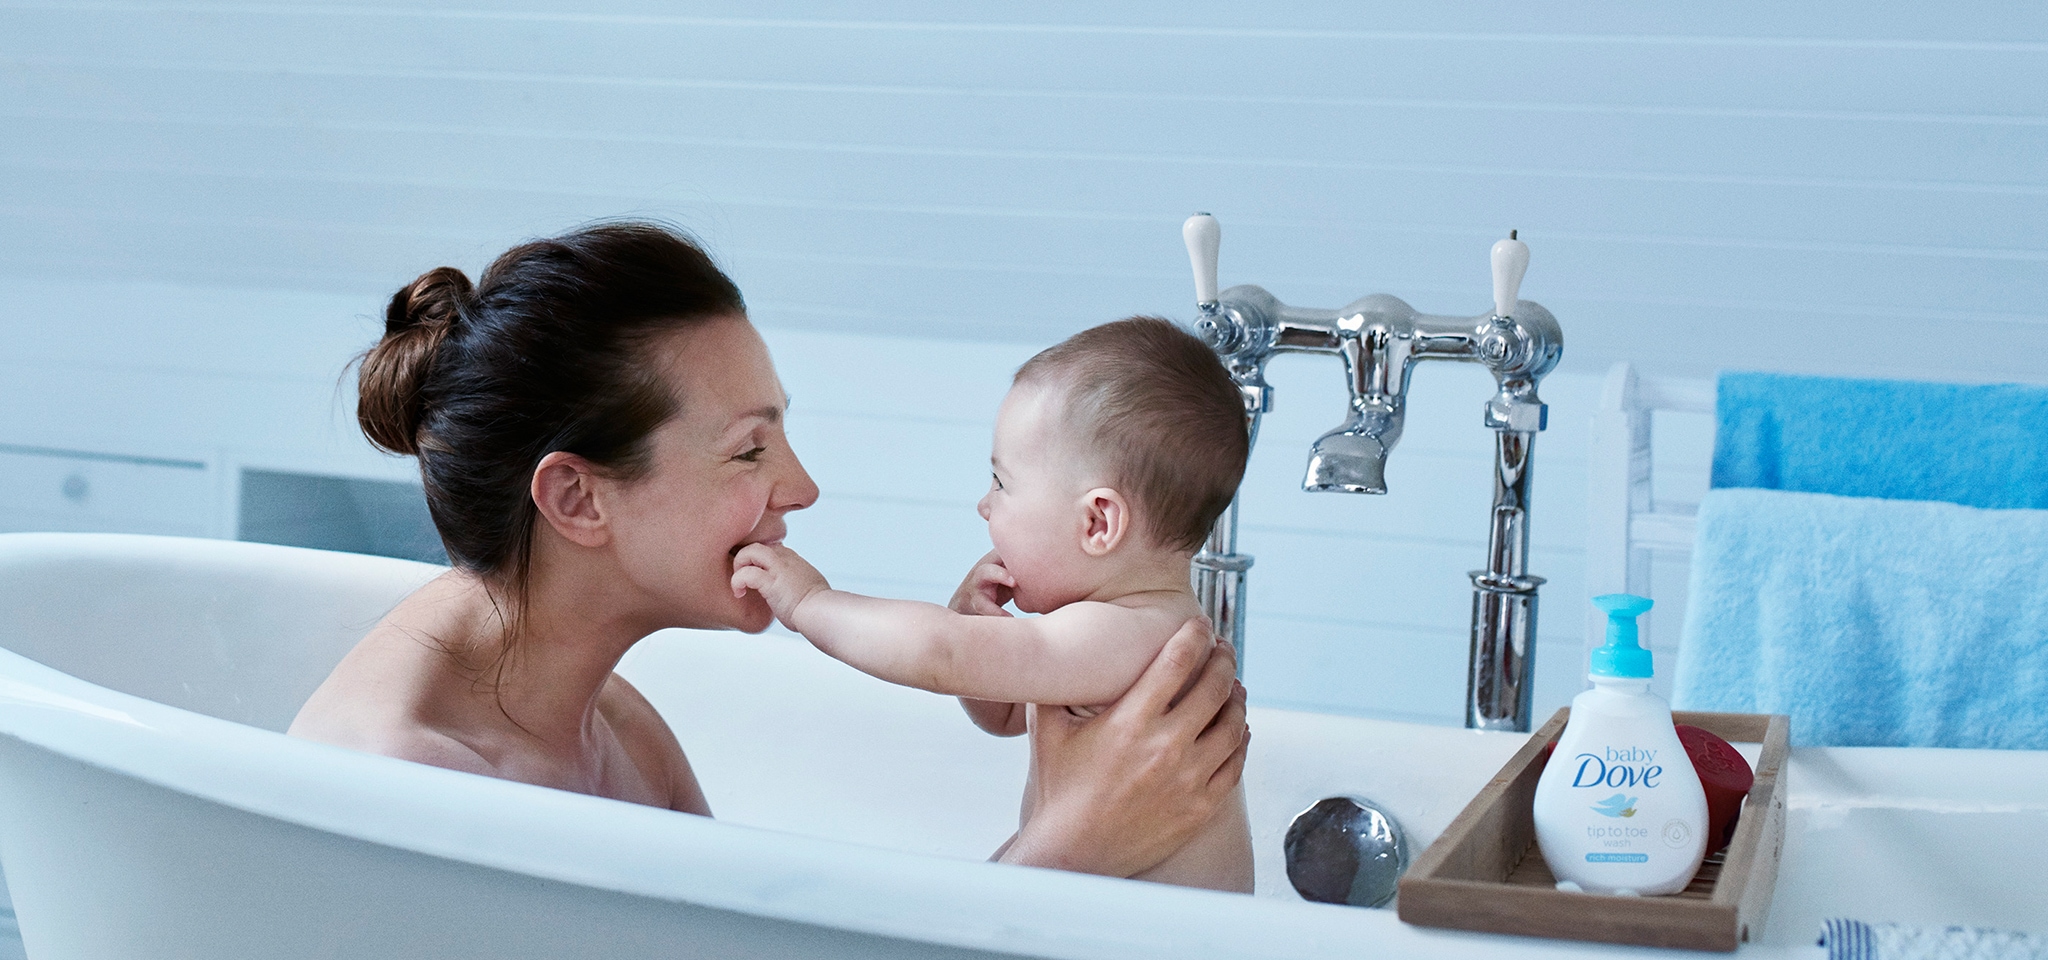 5 of the Best Baby Shampoos Every Parent Should Use